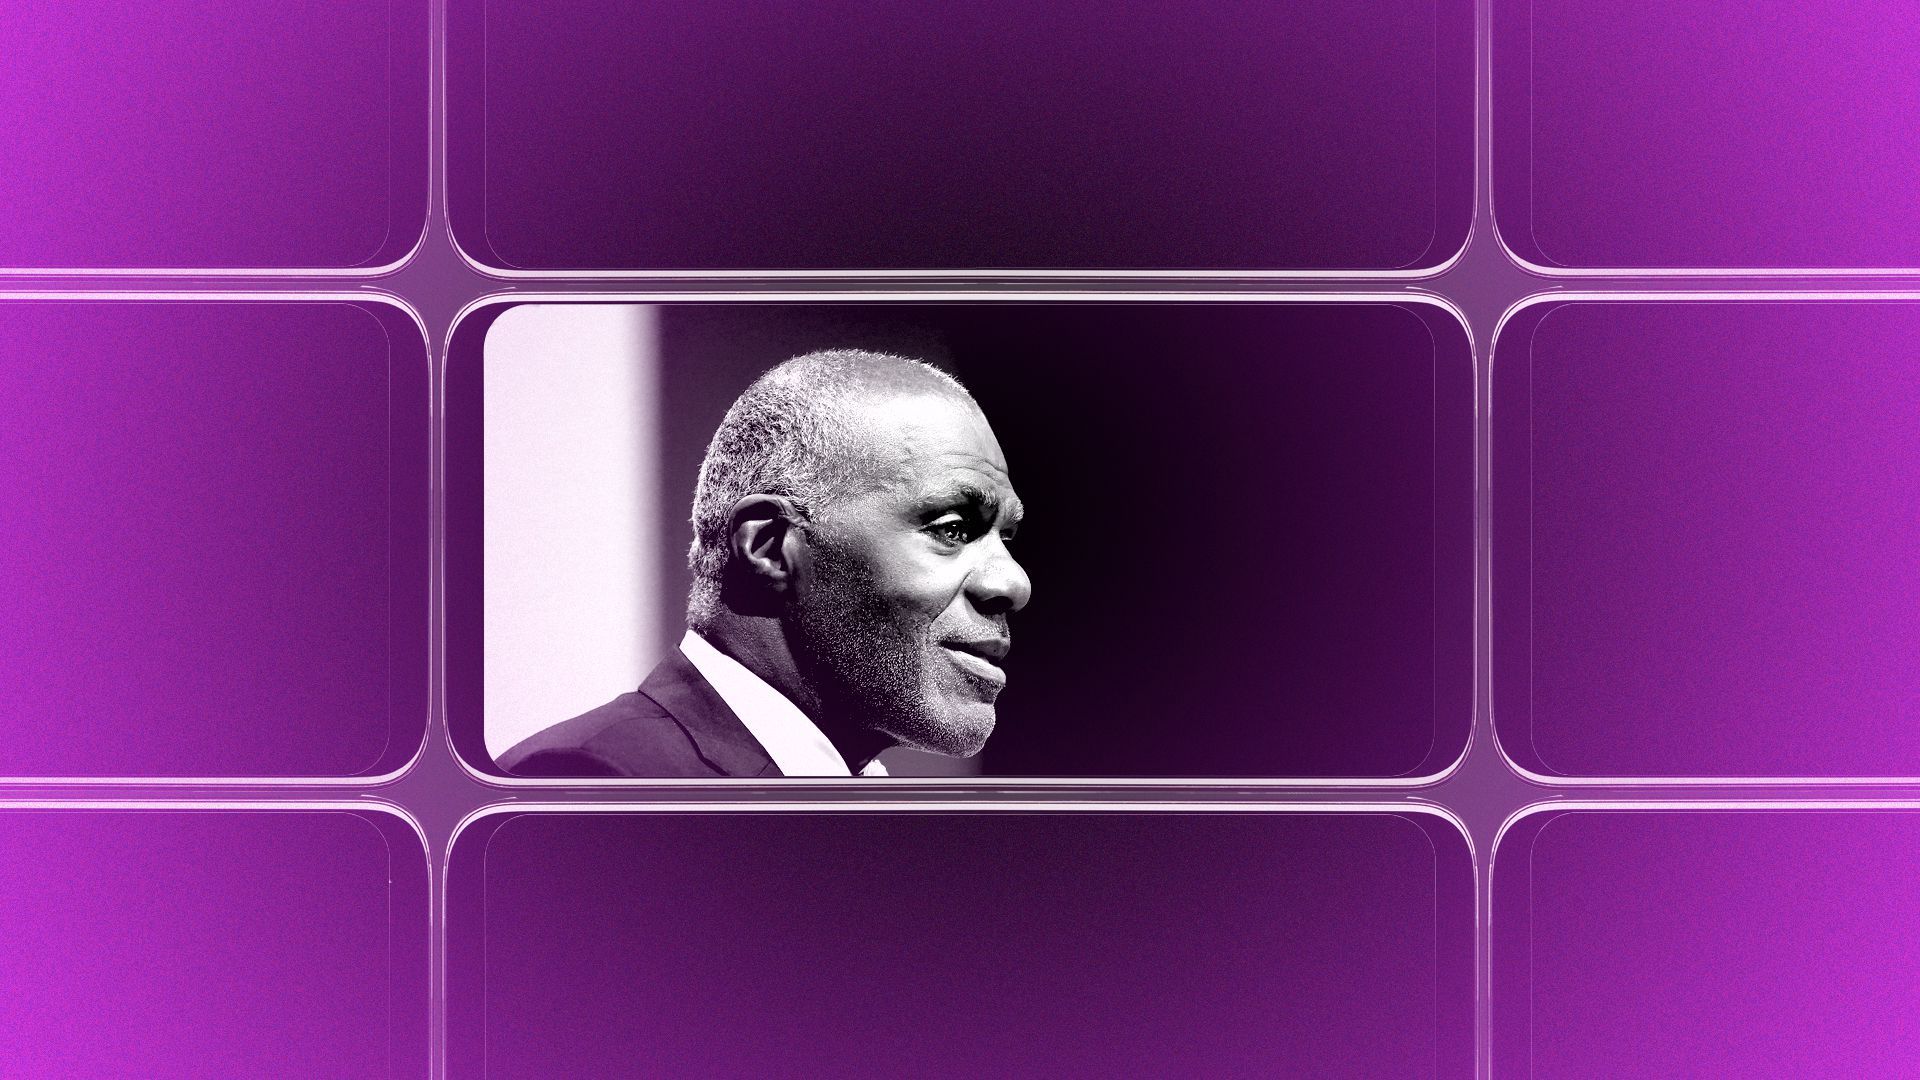 Photo illustration of a grid of smartphone screens, the center one showing an image of Alan Page.